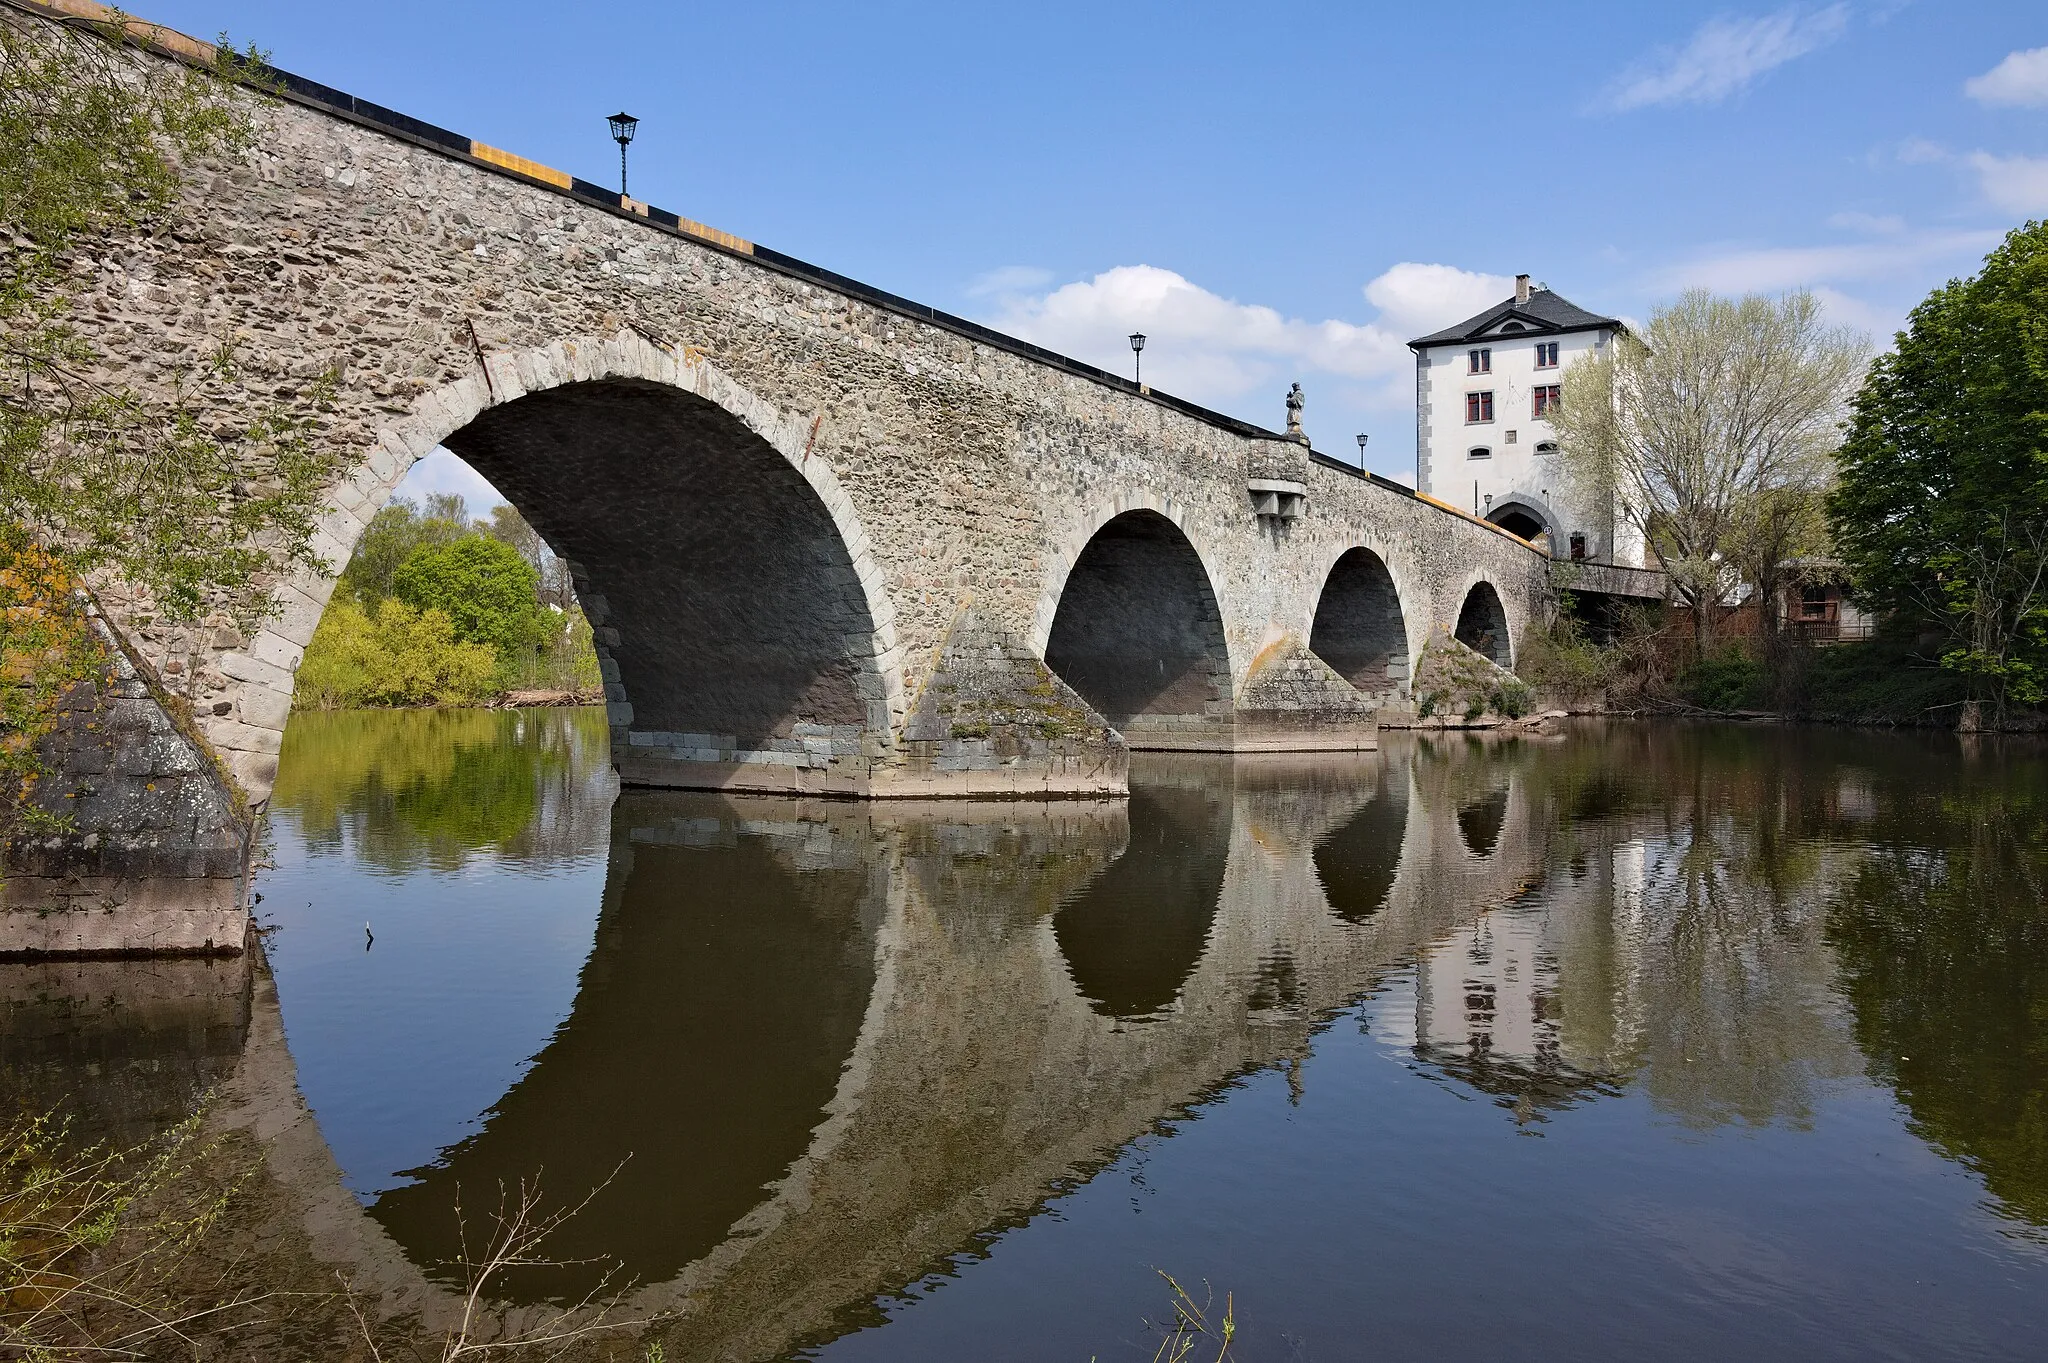 Photo showing: The old bridge over the Lahn river with a bridge tower at Limburg an der Lahn, Germany. The bridge was originally built during the first half of the 14th century. It was demolished during the war in 1945 and restored as well as broadened until 1948. View from the southern river bank onto the eastern side of the bridge.